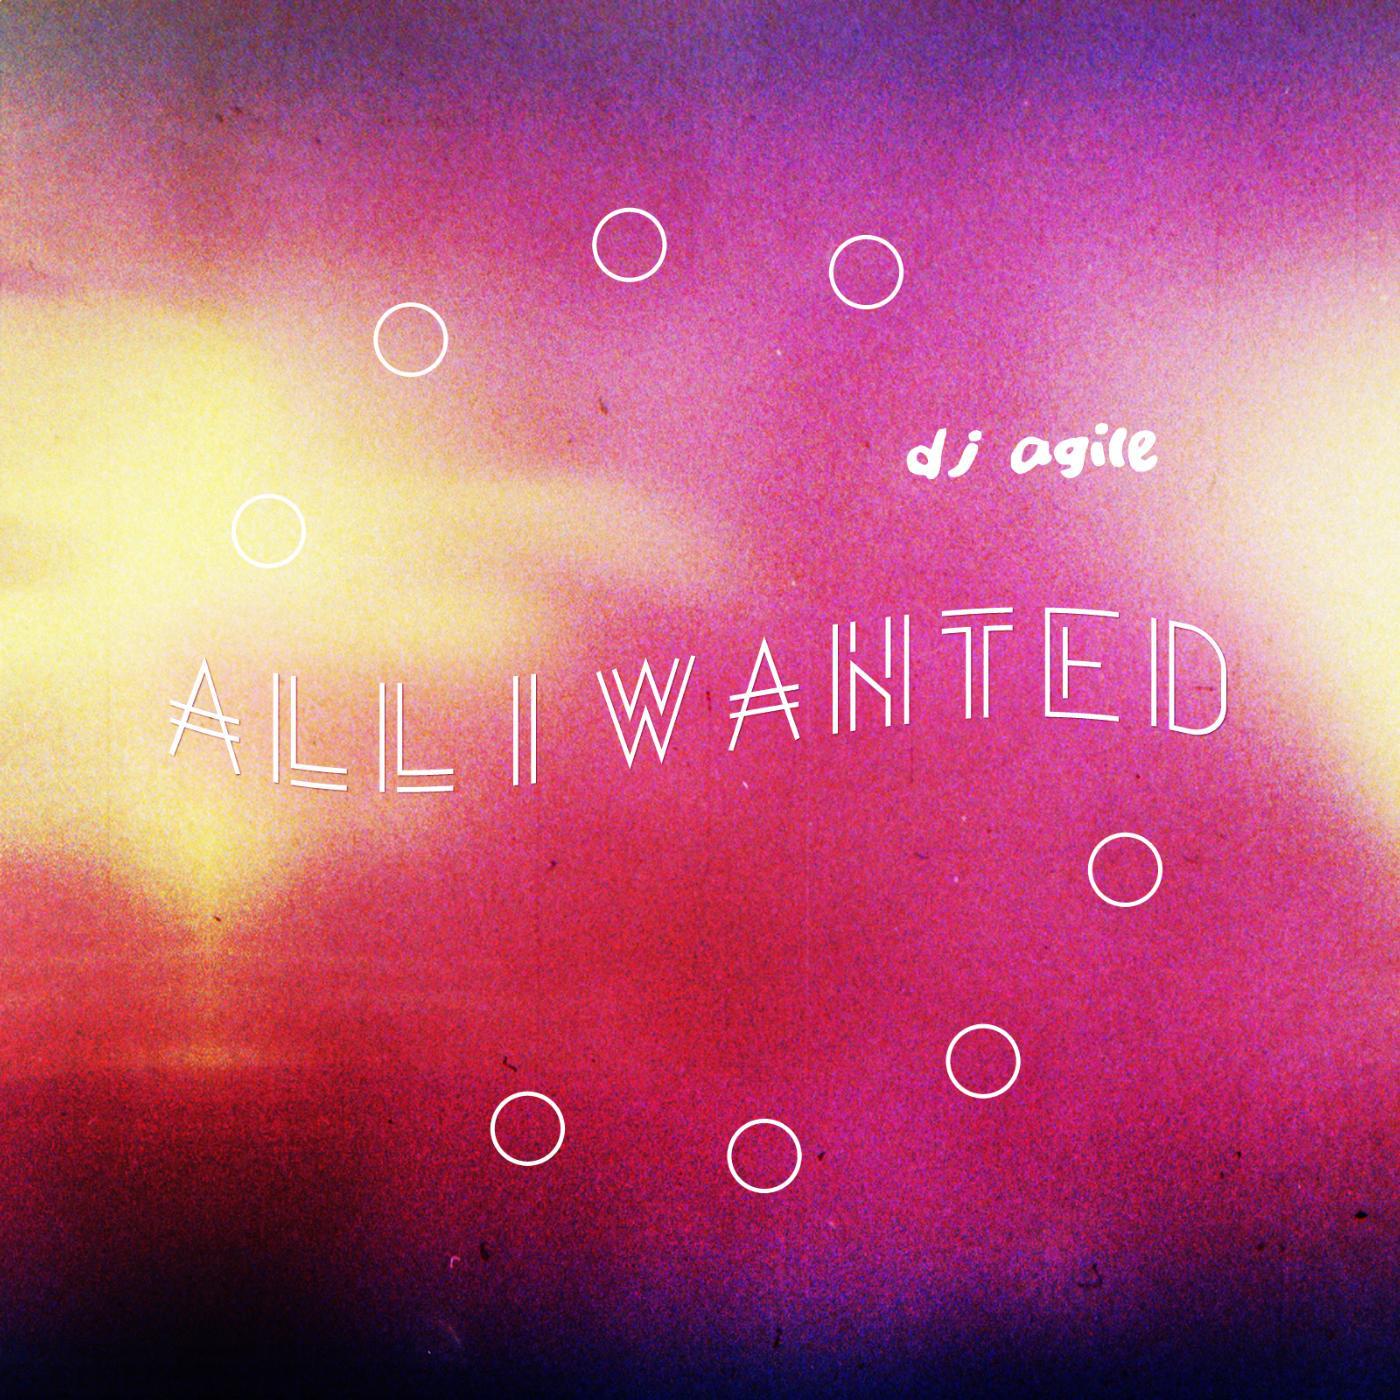 Game all i know. All i want. DJ Agile. All i wanted Paramore. Album Art all i want (6491-2) all i want.